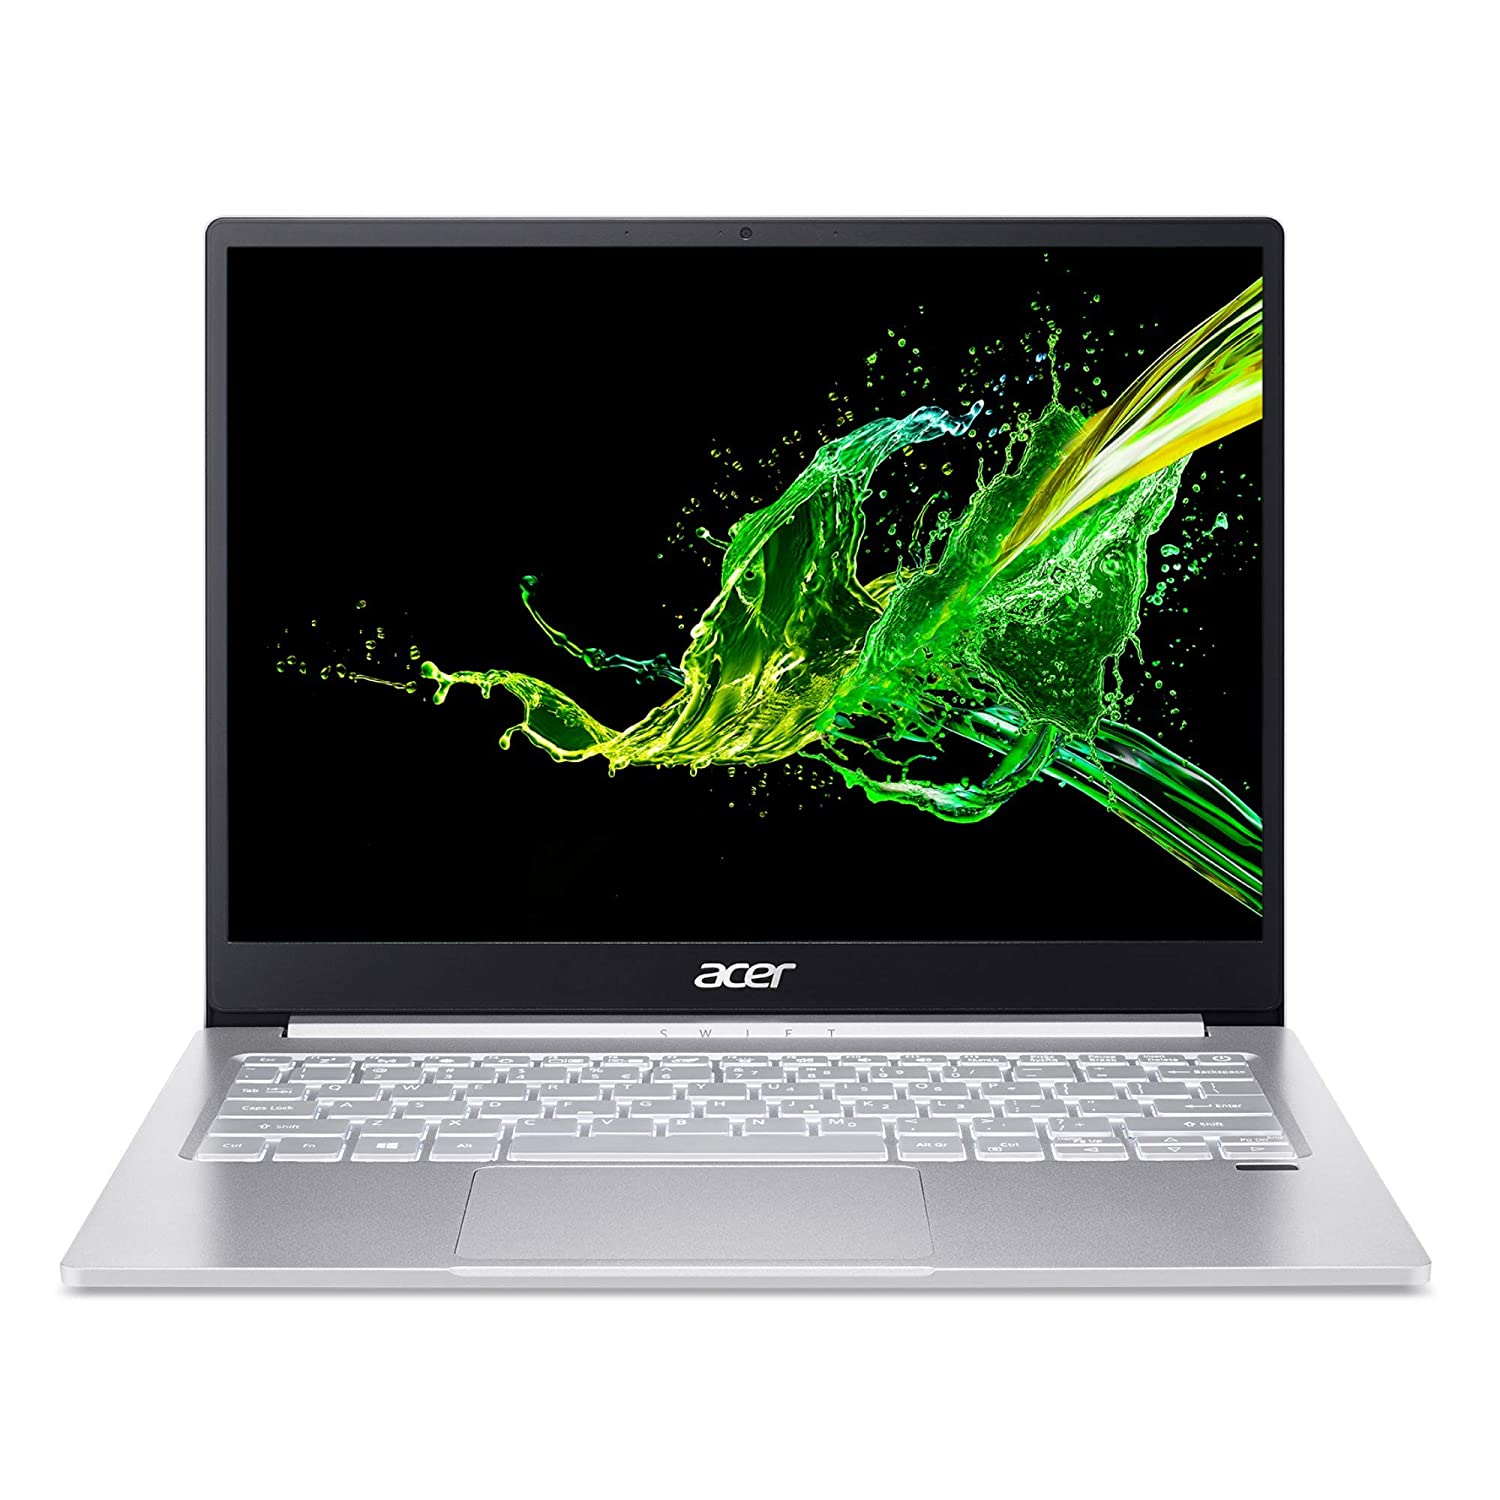 Acer Swift 3 SF313-52 10th Gen Intel Core i5-1035G4 Processor 13.5 inches 2256 X 1504, LCD, LED Laptop